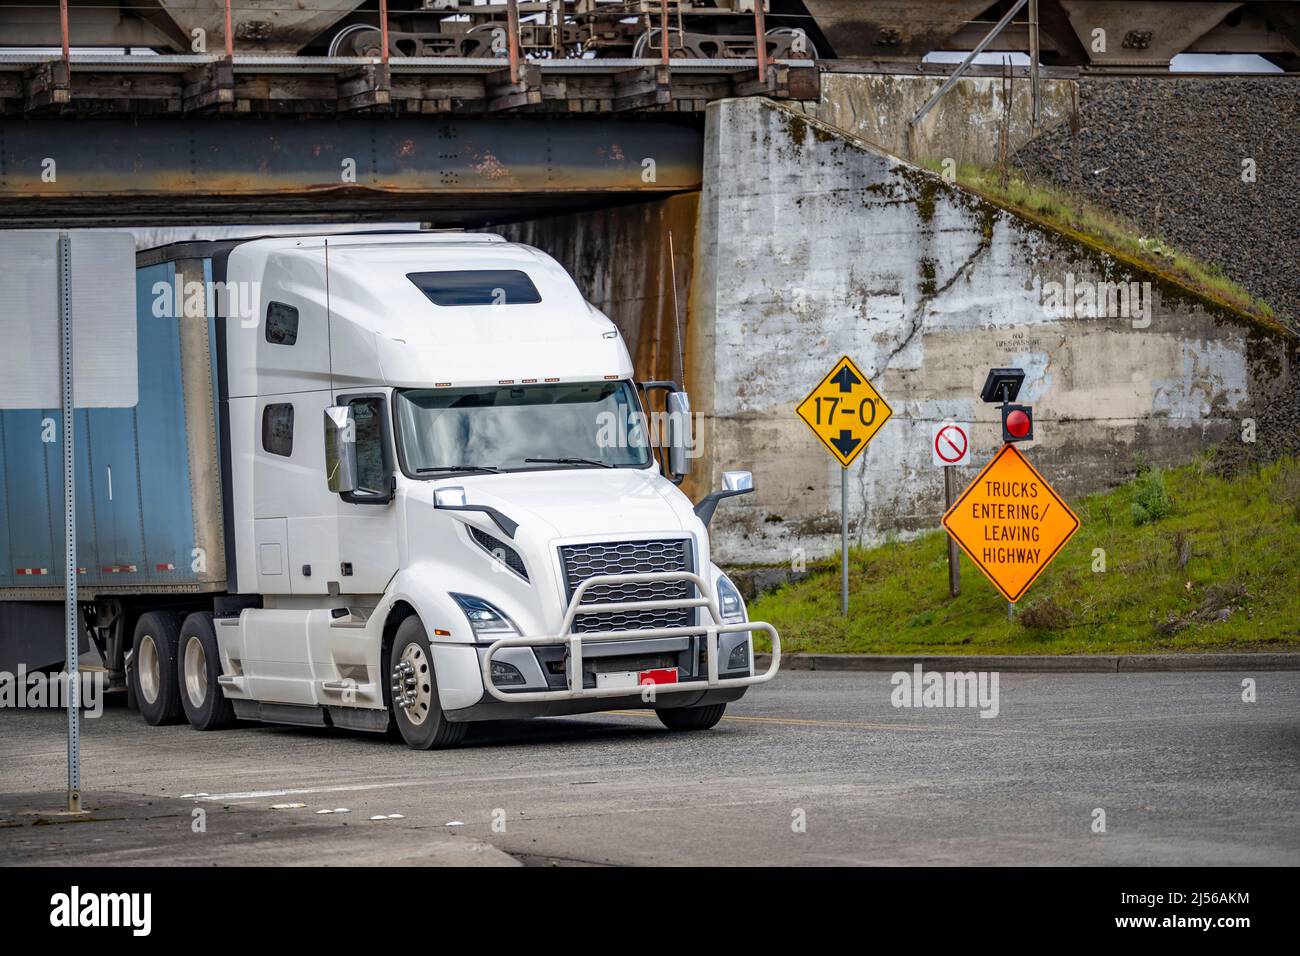 Industrial standard bright white high cab long haul big rig semi truck with dry van semi trailer transporting commercial cargo turning on the local ci Stock Photo